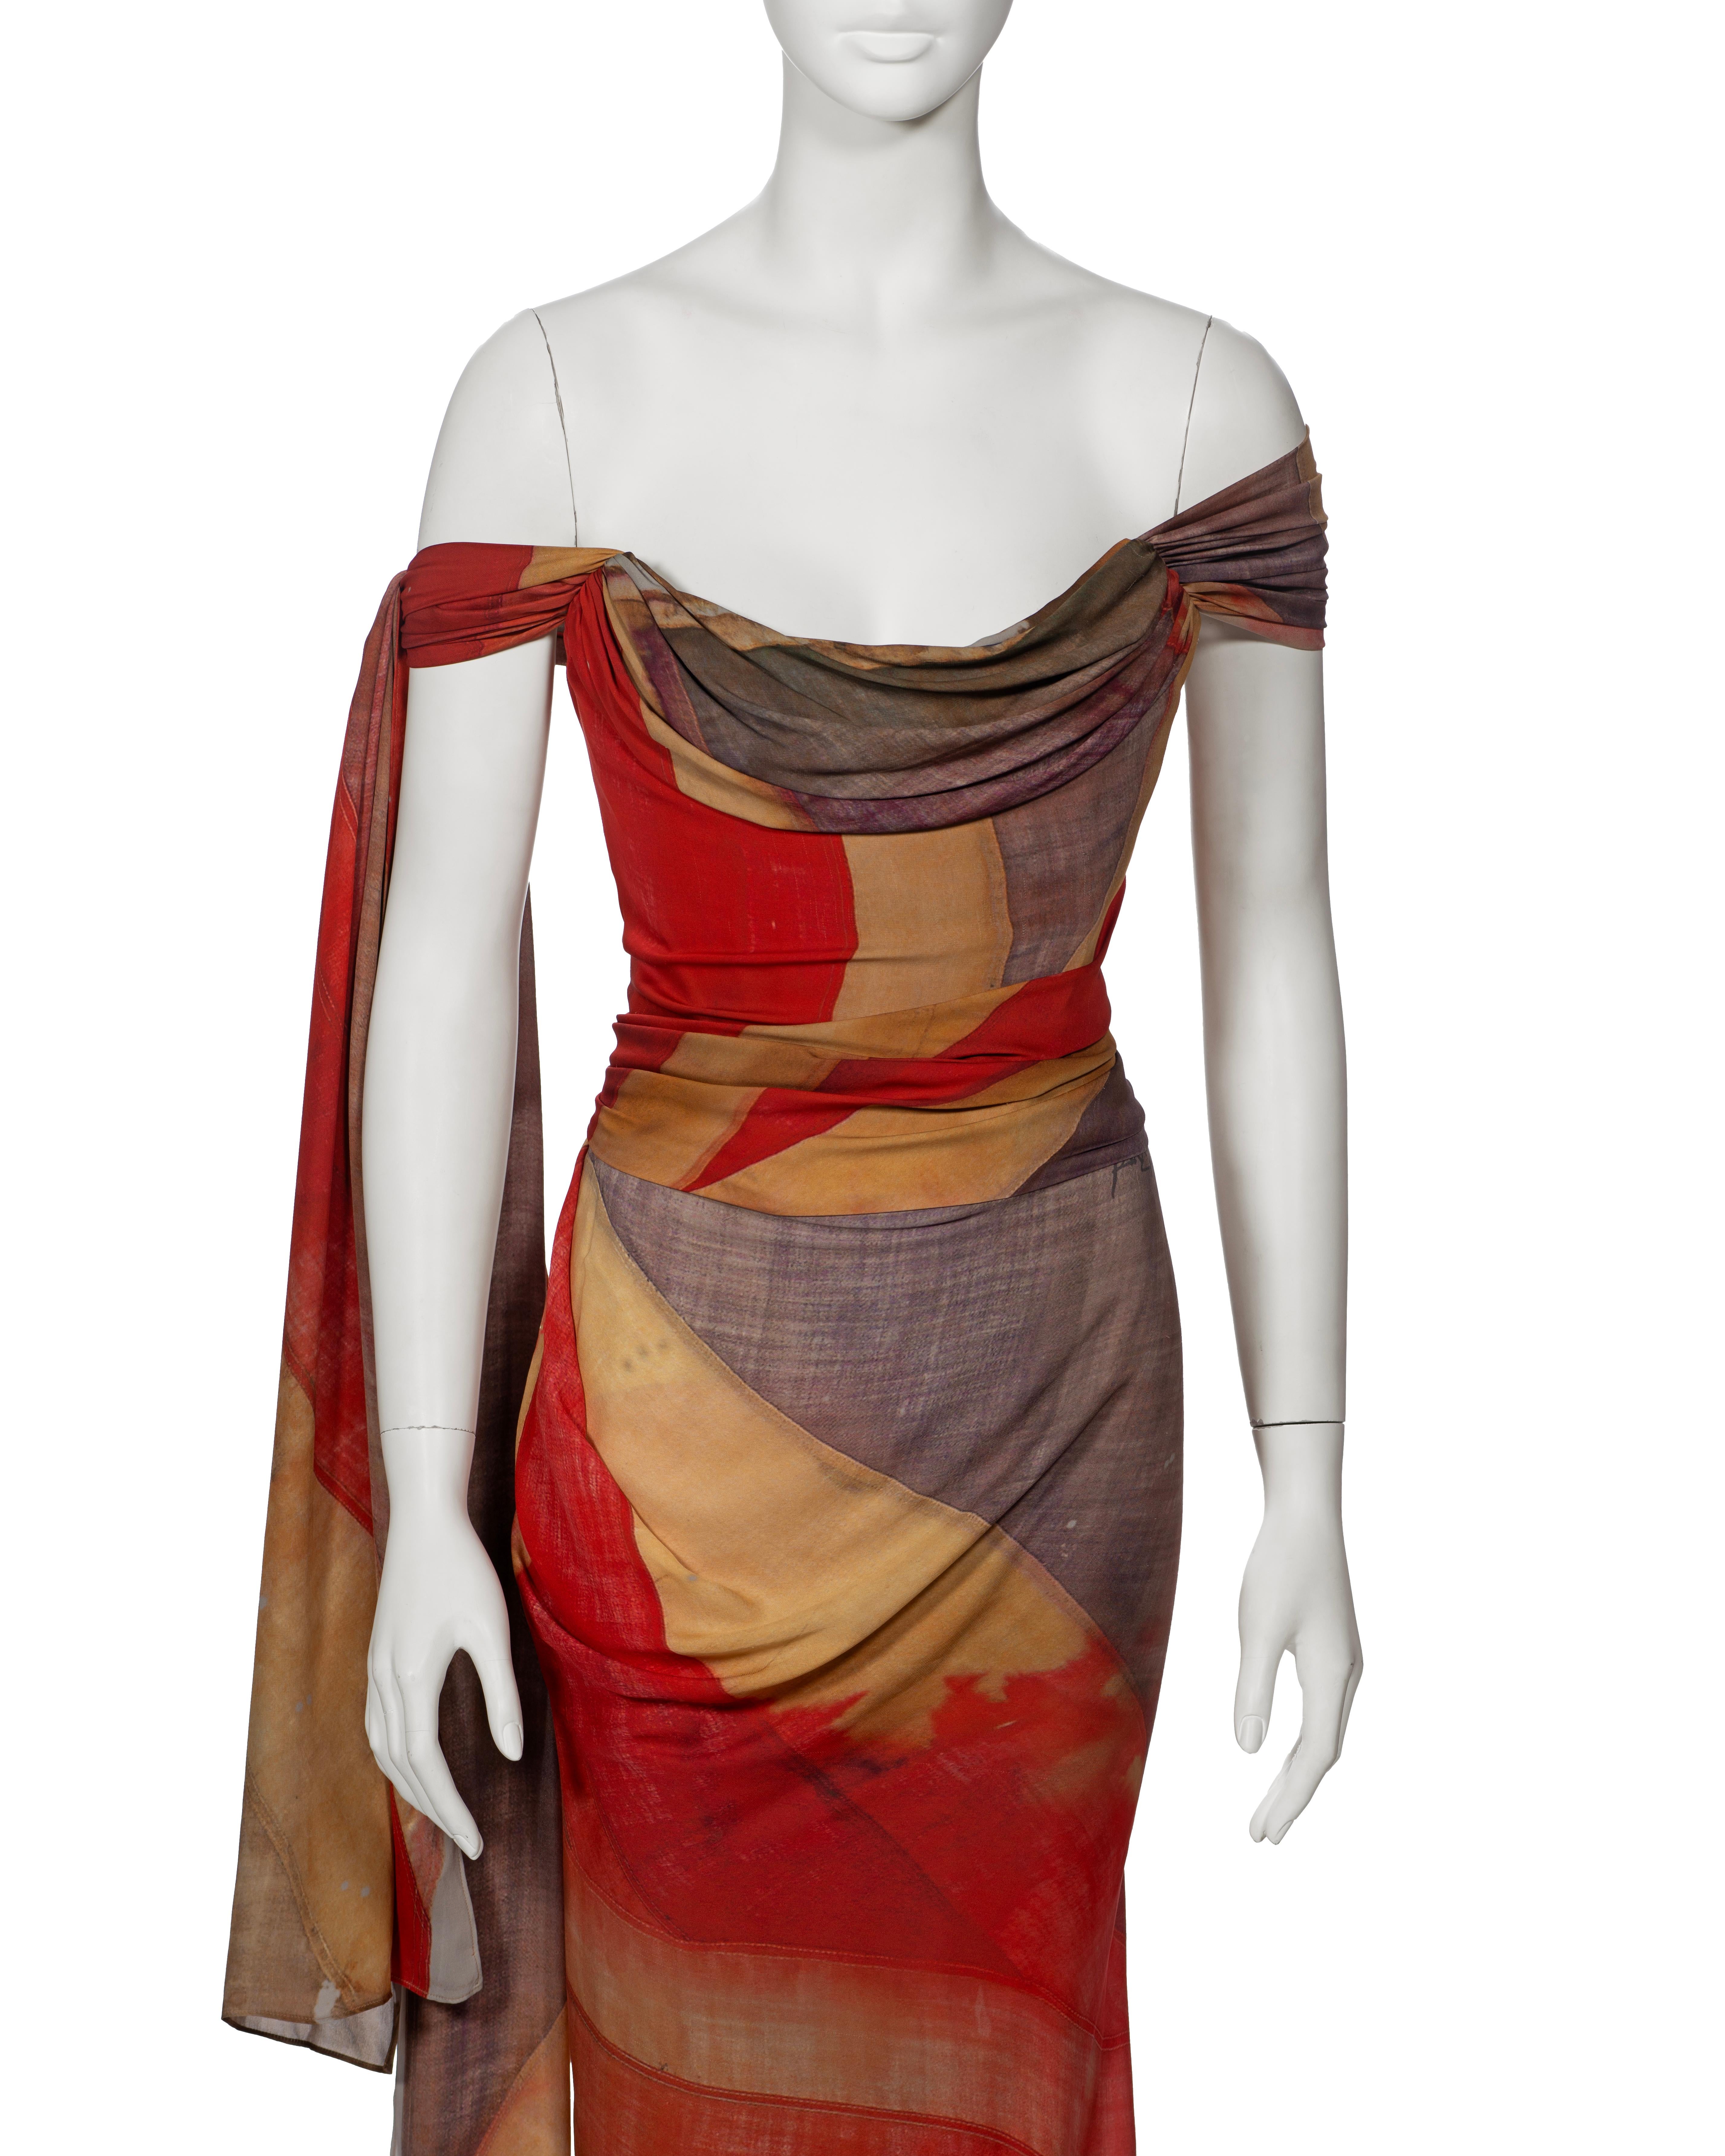 Vivienne Westwood The Queen's Diamond Jubilee Corseted Draped Silk Dress, 2012 In Excellent Condition For Sale In London, GB